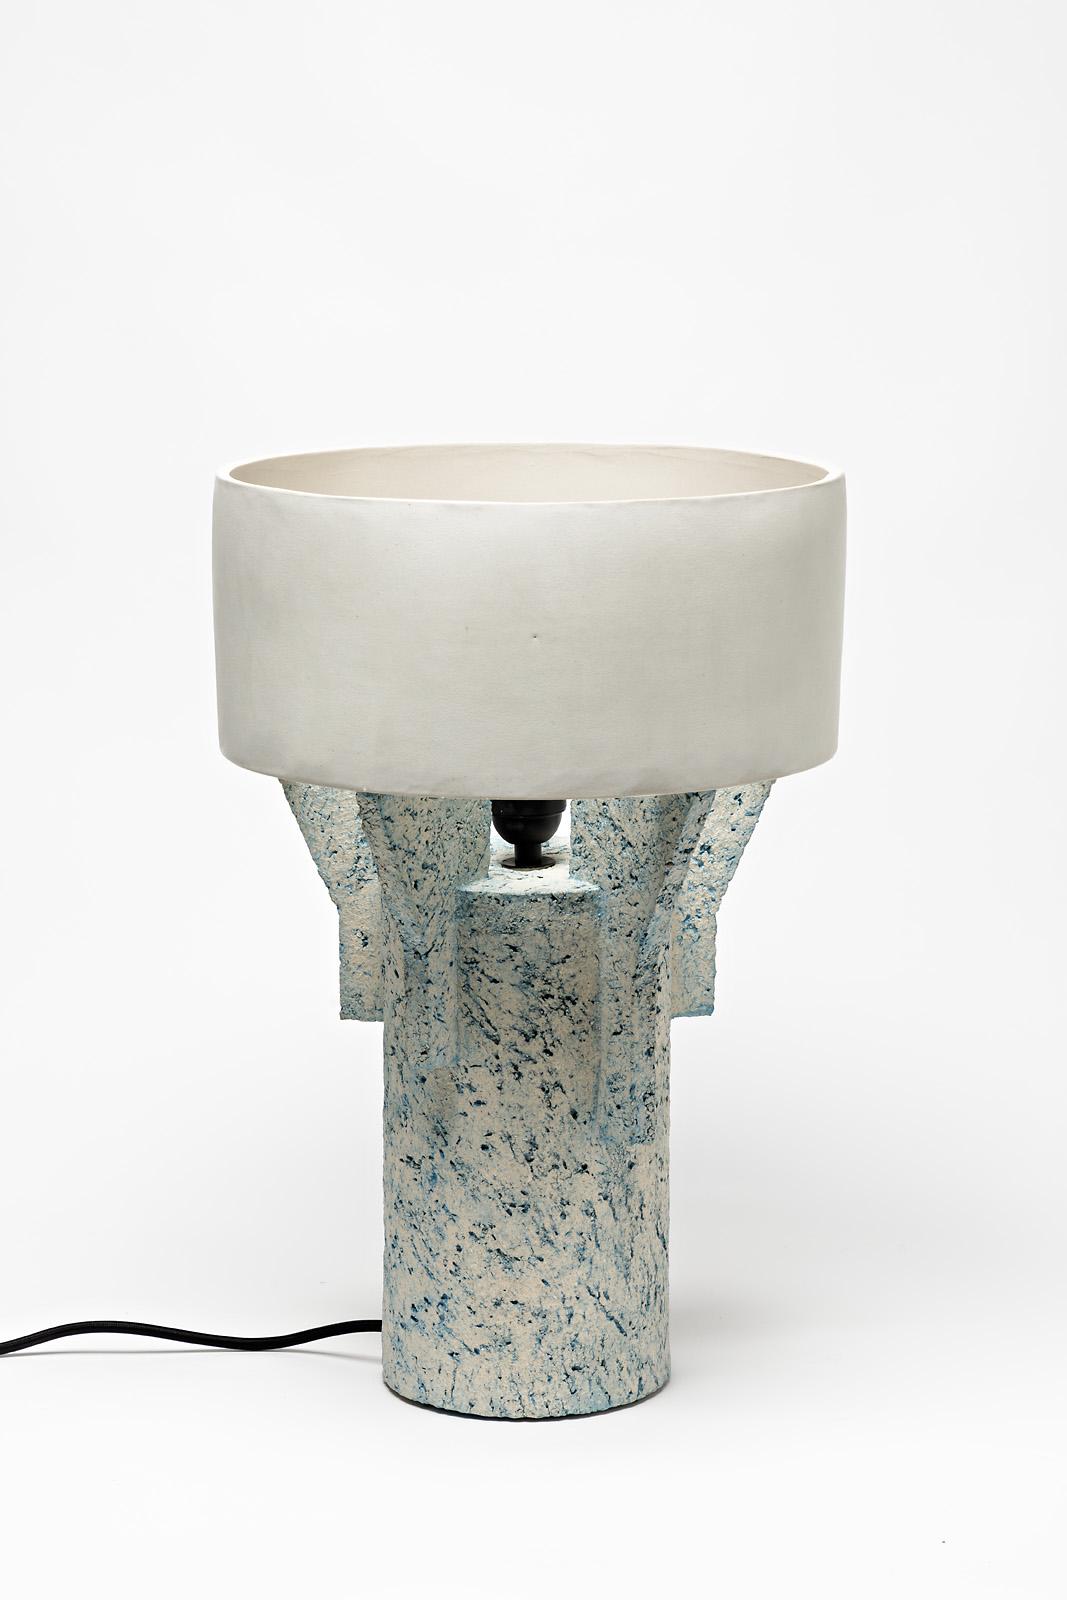 A ceramic table lamp by Denis Castaing with white glaze decoration.
The base and the lamp shade are in ceramic.
Sold with an European electrical system.
Perfect original conditions.
2019.
Signed under the base.